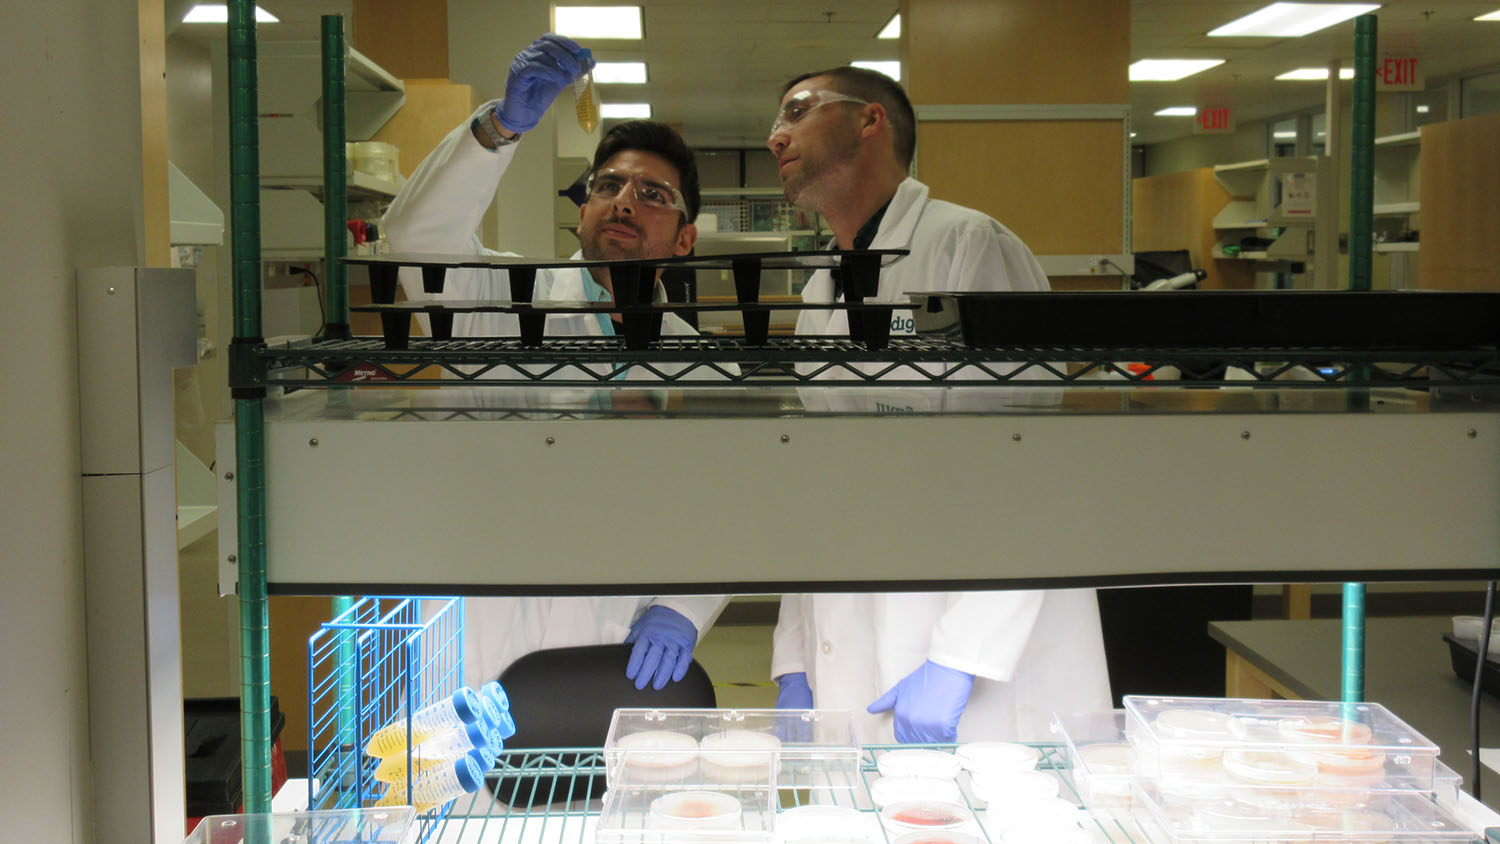 MMB Student working in a lab during their summer internship